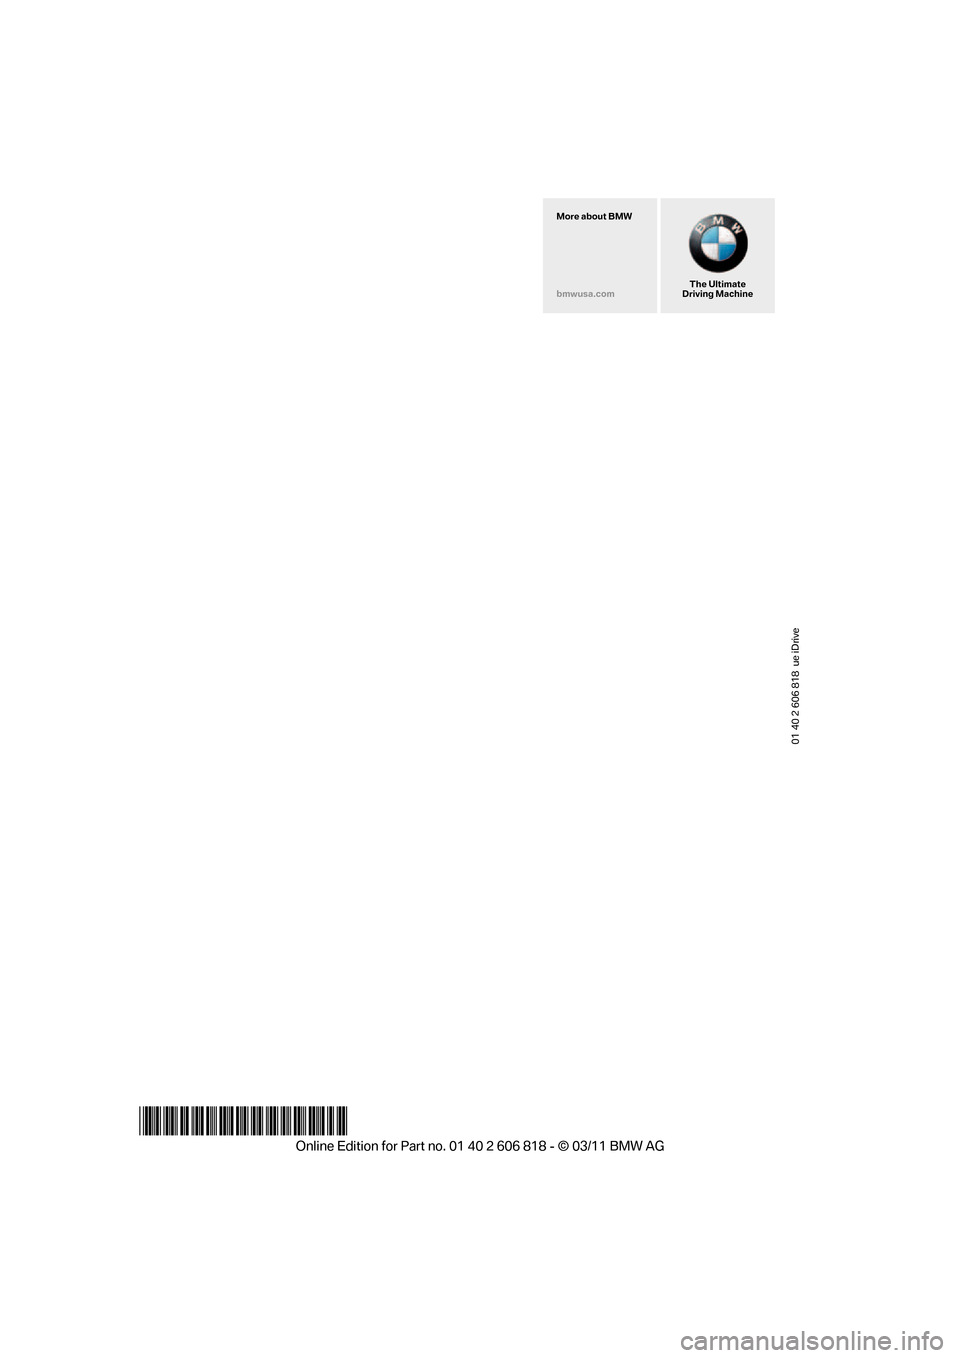 BMW 135I 2012 E88 Owners Manual 01 40 2 606 818  ue iDrive
*BL260681800D*
The Ultimate
Driving Machine More about BMW
bmwusa.com 